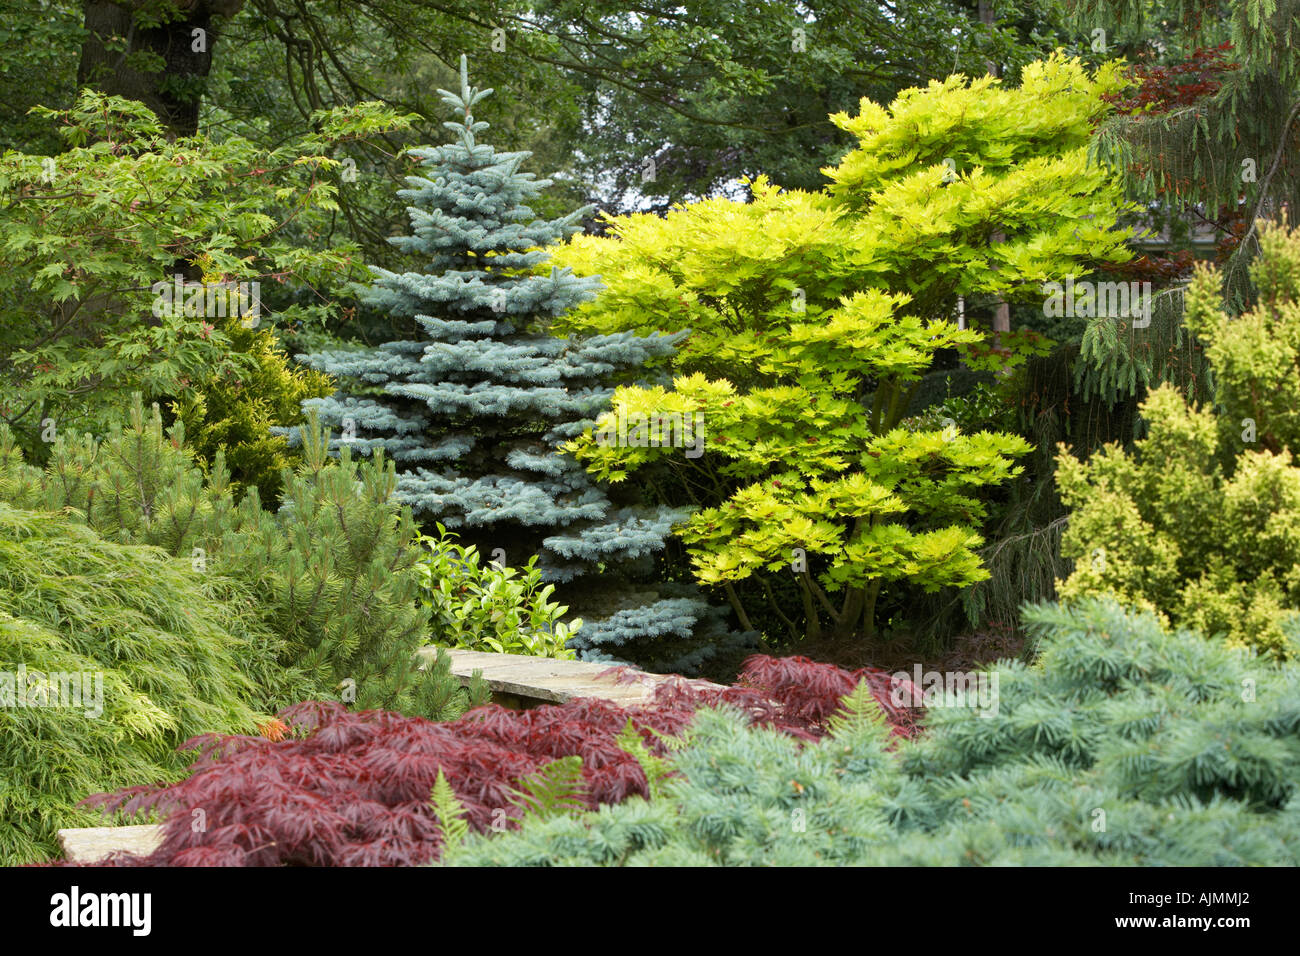 Conifers in the garden Stock Photo